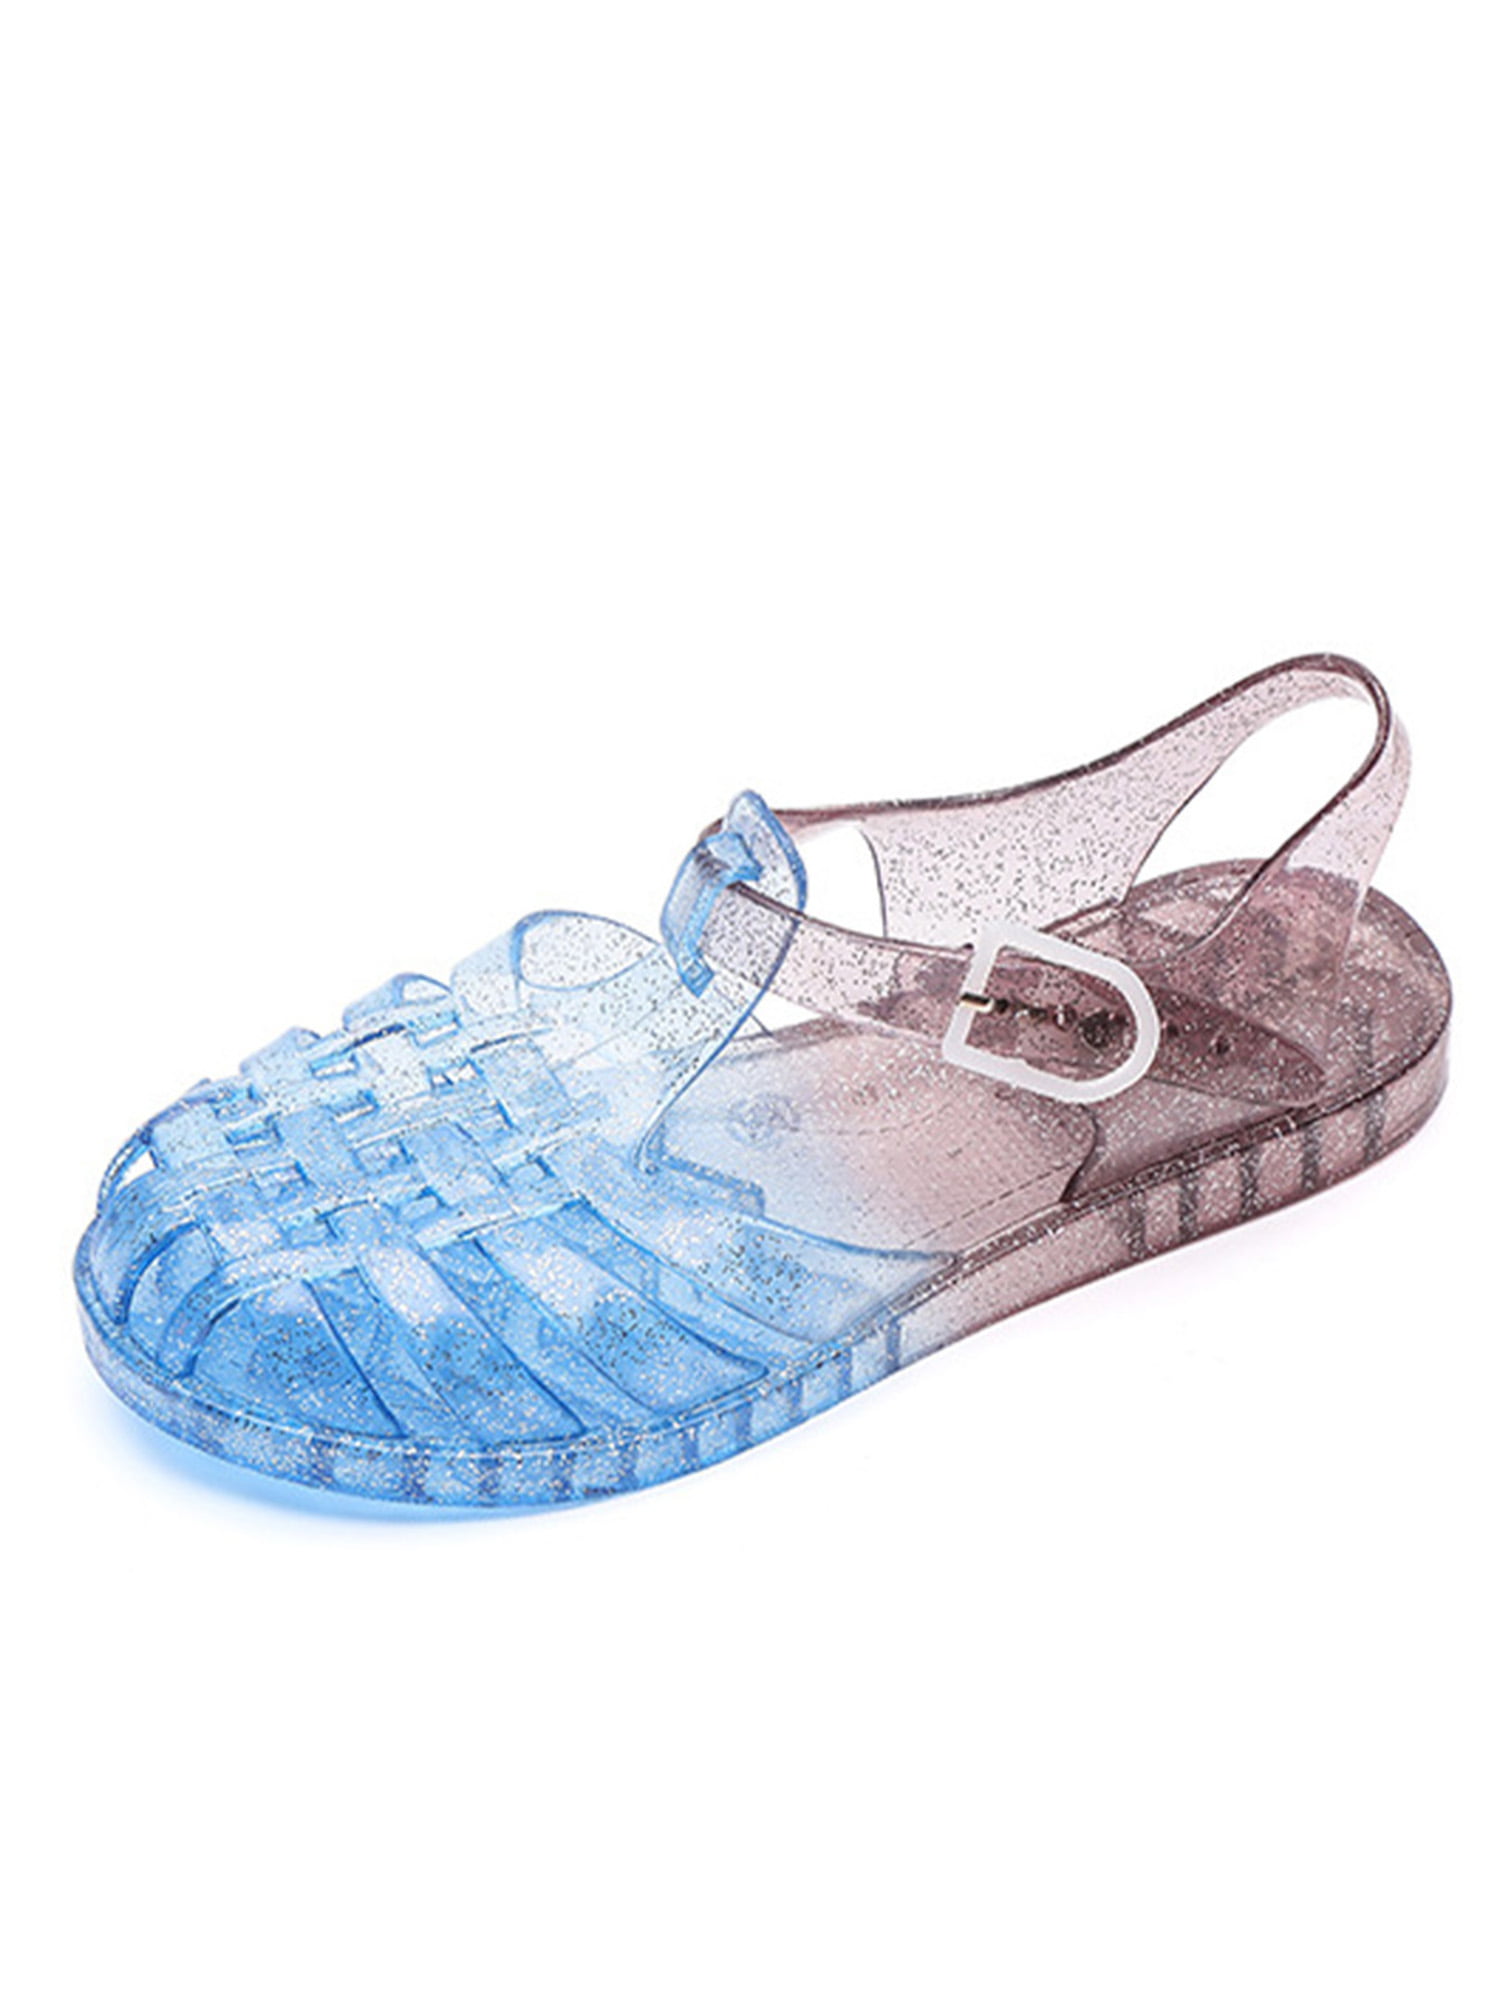 Details about   Unisex Jelly Sandals Slides Slippers Yellow Big Kids 1-2 EU 32-33 